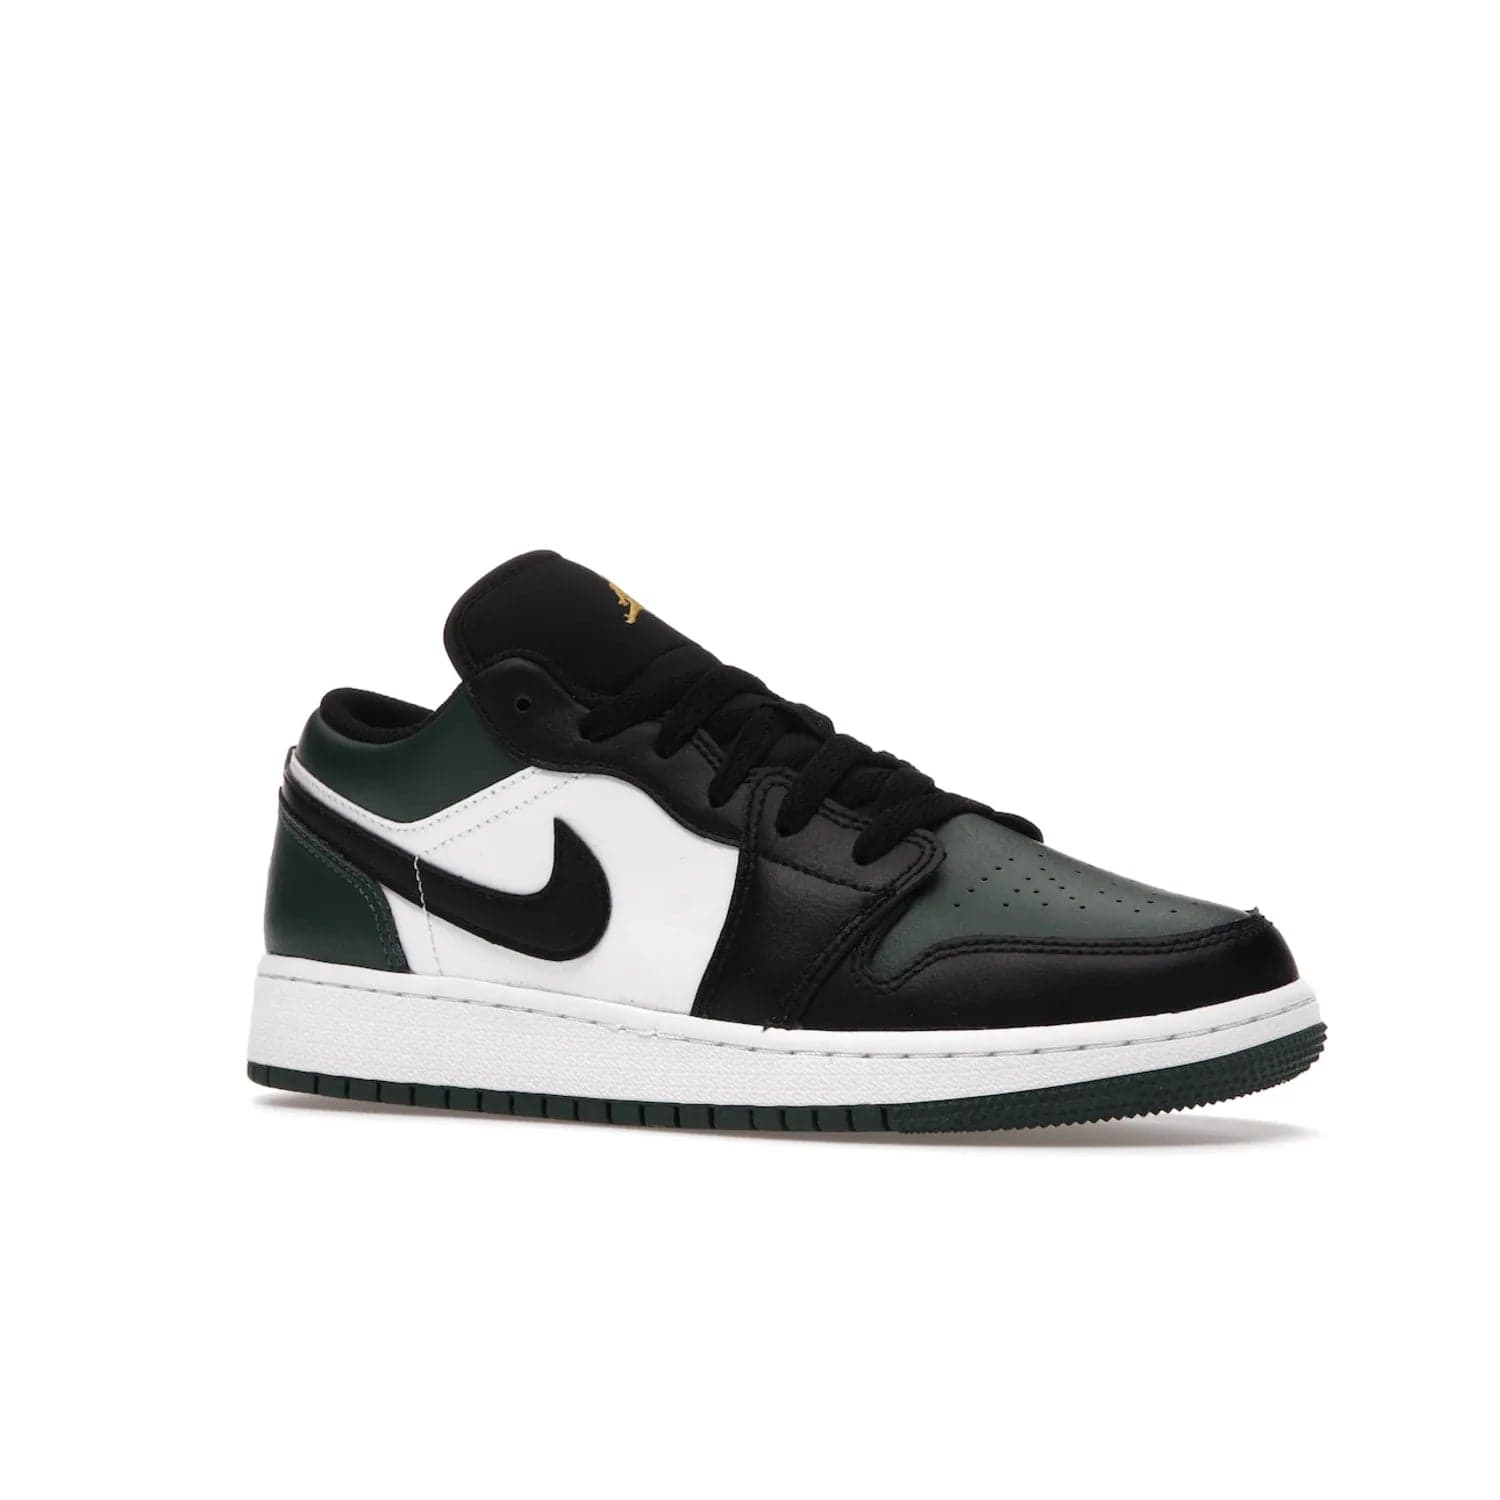 Jordan 1 Low Green Toe (GS) - Image 4 - Only at www.BallersClubKickz.com - Get the perfect low cut Jordans. Shop the Air Jordan 1 Low Noble Green GS shoes with its unique colorway and stencil Jumpman logo. Available October 2021.